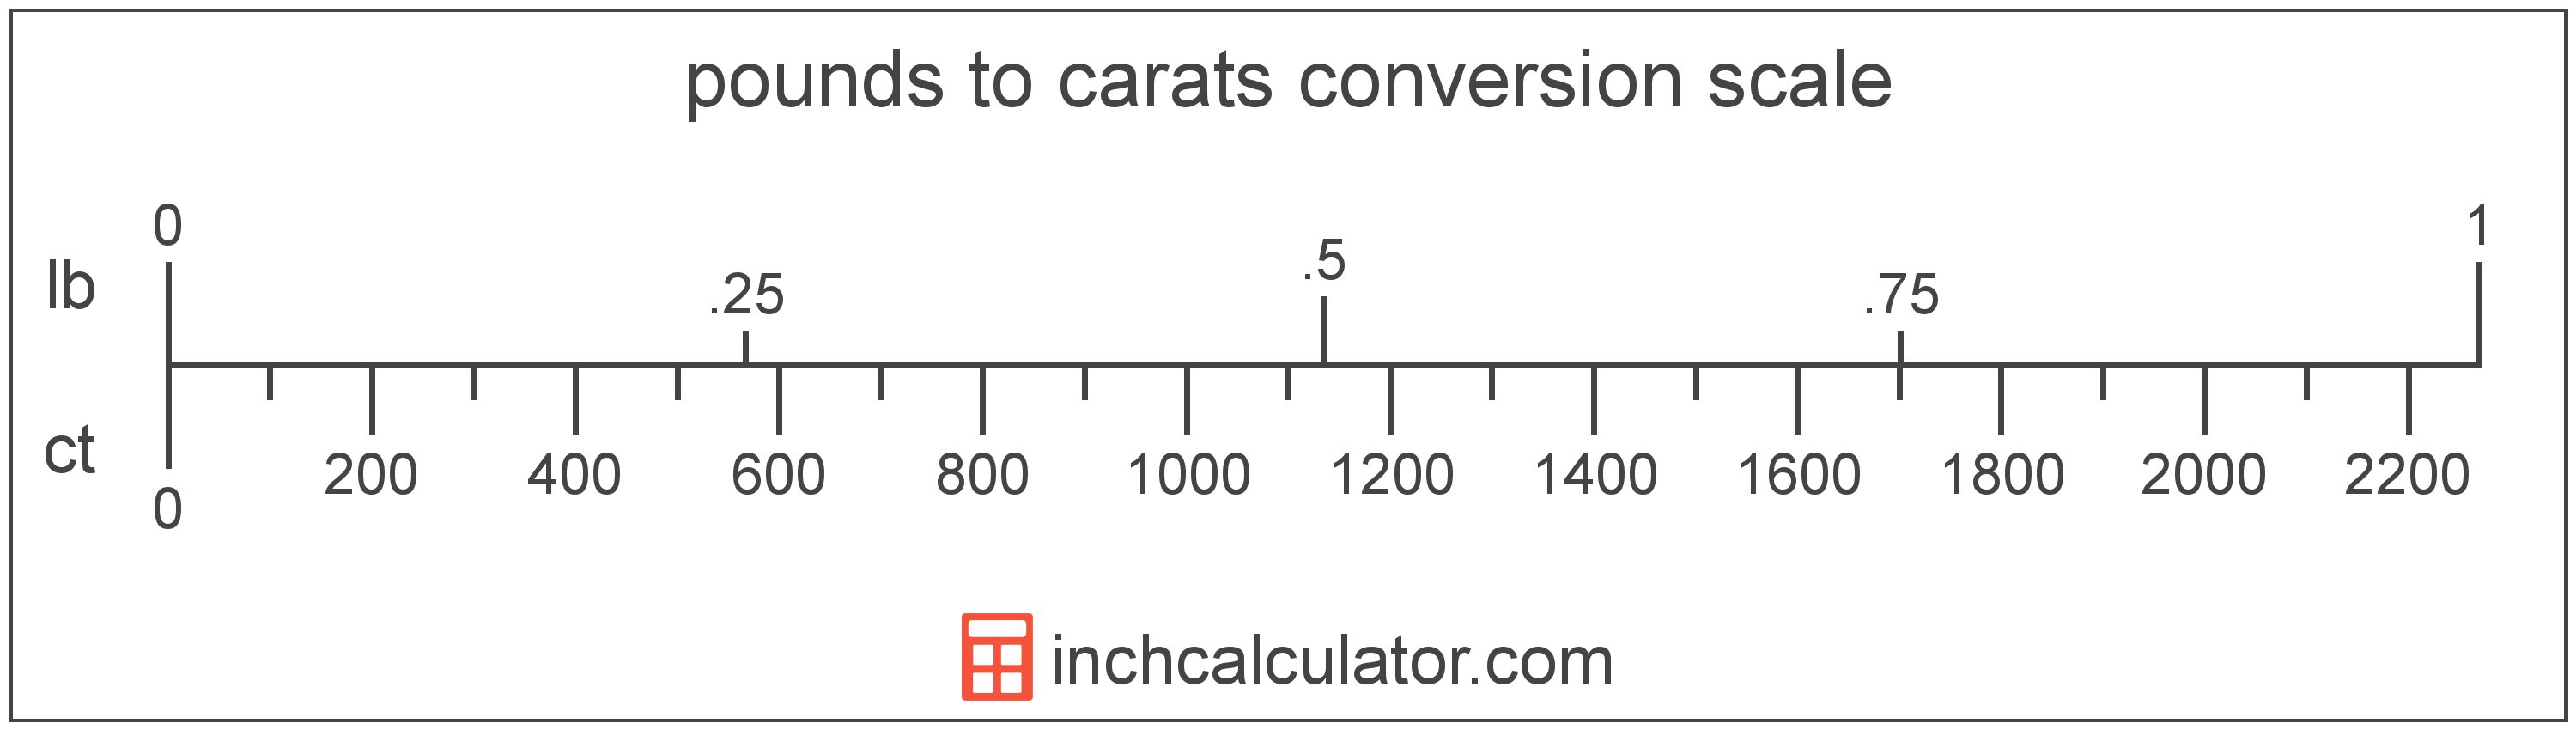 Pounds And Ounces To Grams Conversion Chart